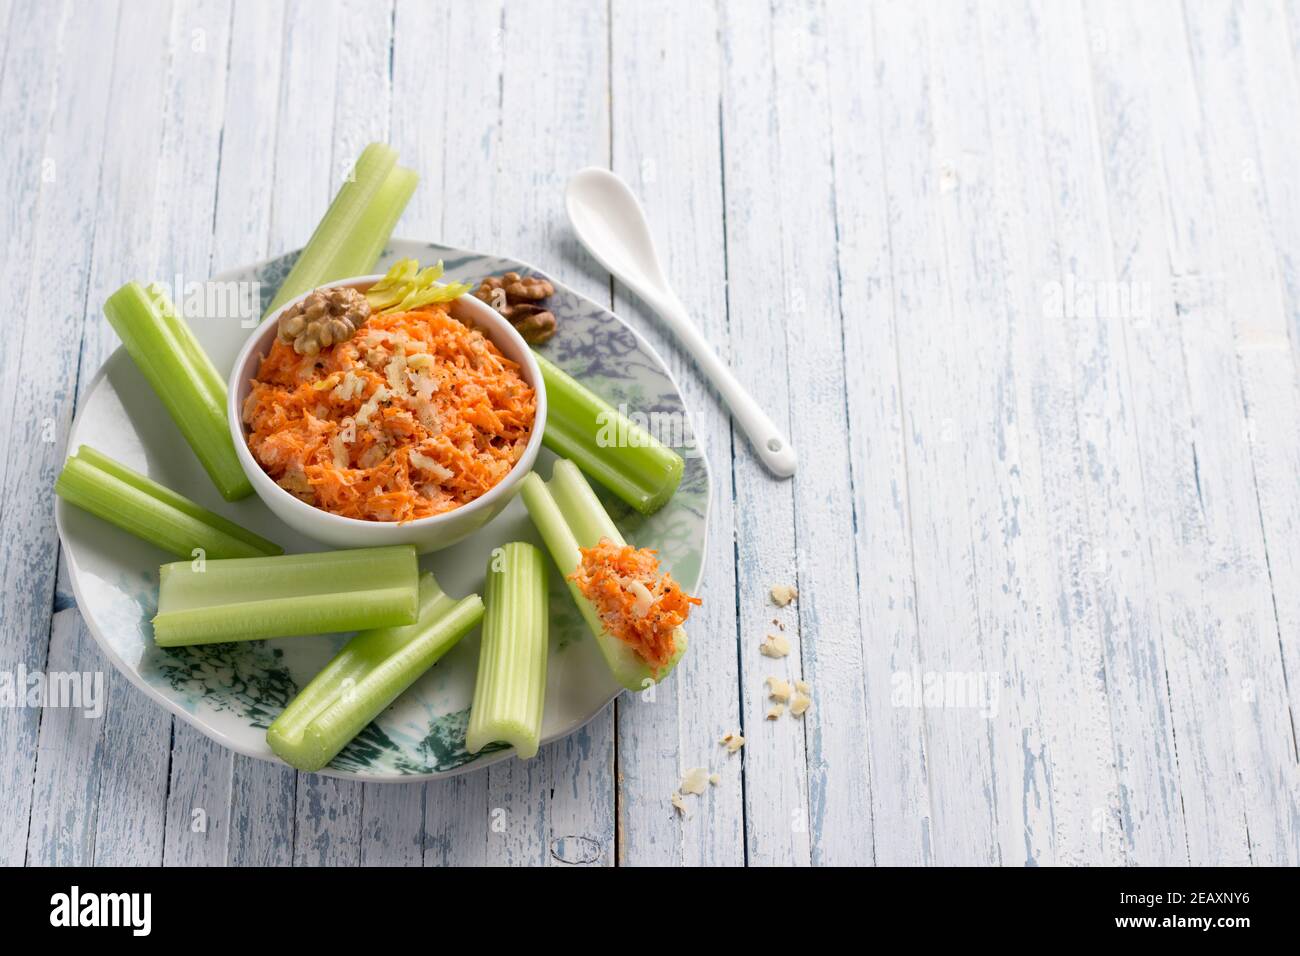 Delicious vegetable diet snack, celery stalks with carrot dip with nuts, garlic, spices and yoghurt dressing on light blue background, top view, selec Stock Photo